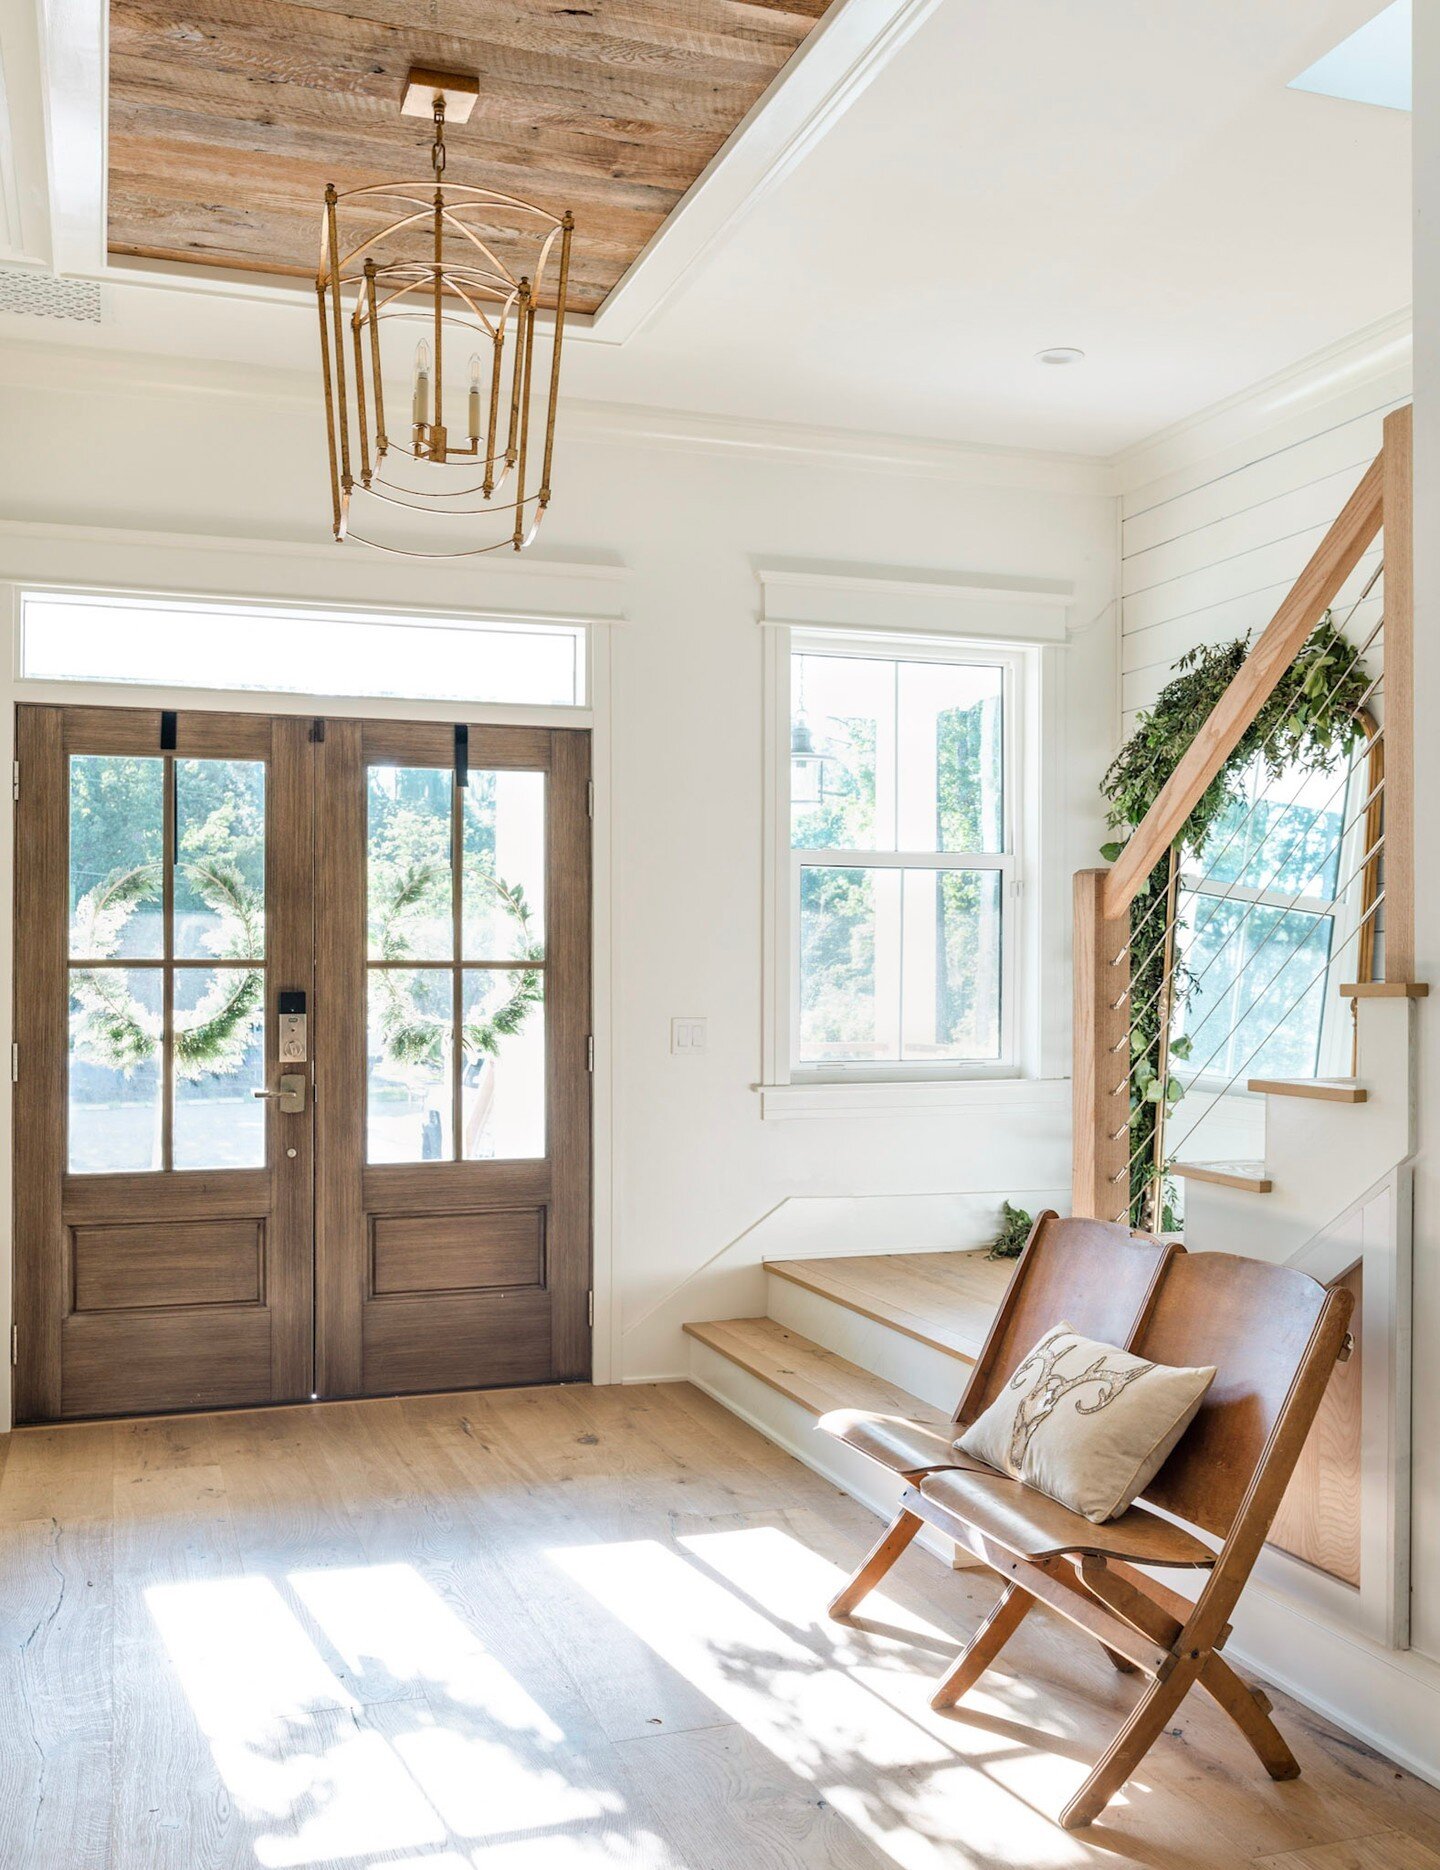 Both on interior rail systems and exterior decks, the desire for unimpeded views is a strong motivator to select stainless steel cable infill.
-
📷 @jettsetfarmhouse
-
#LJSmith #StairExperts #StairInspiration #Farmhouse #LinearCollection #CableRail #